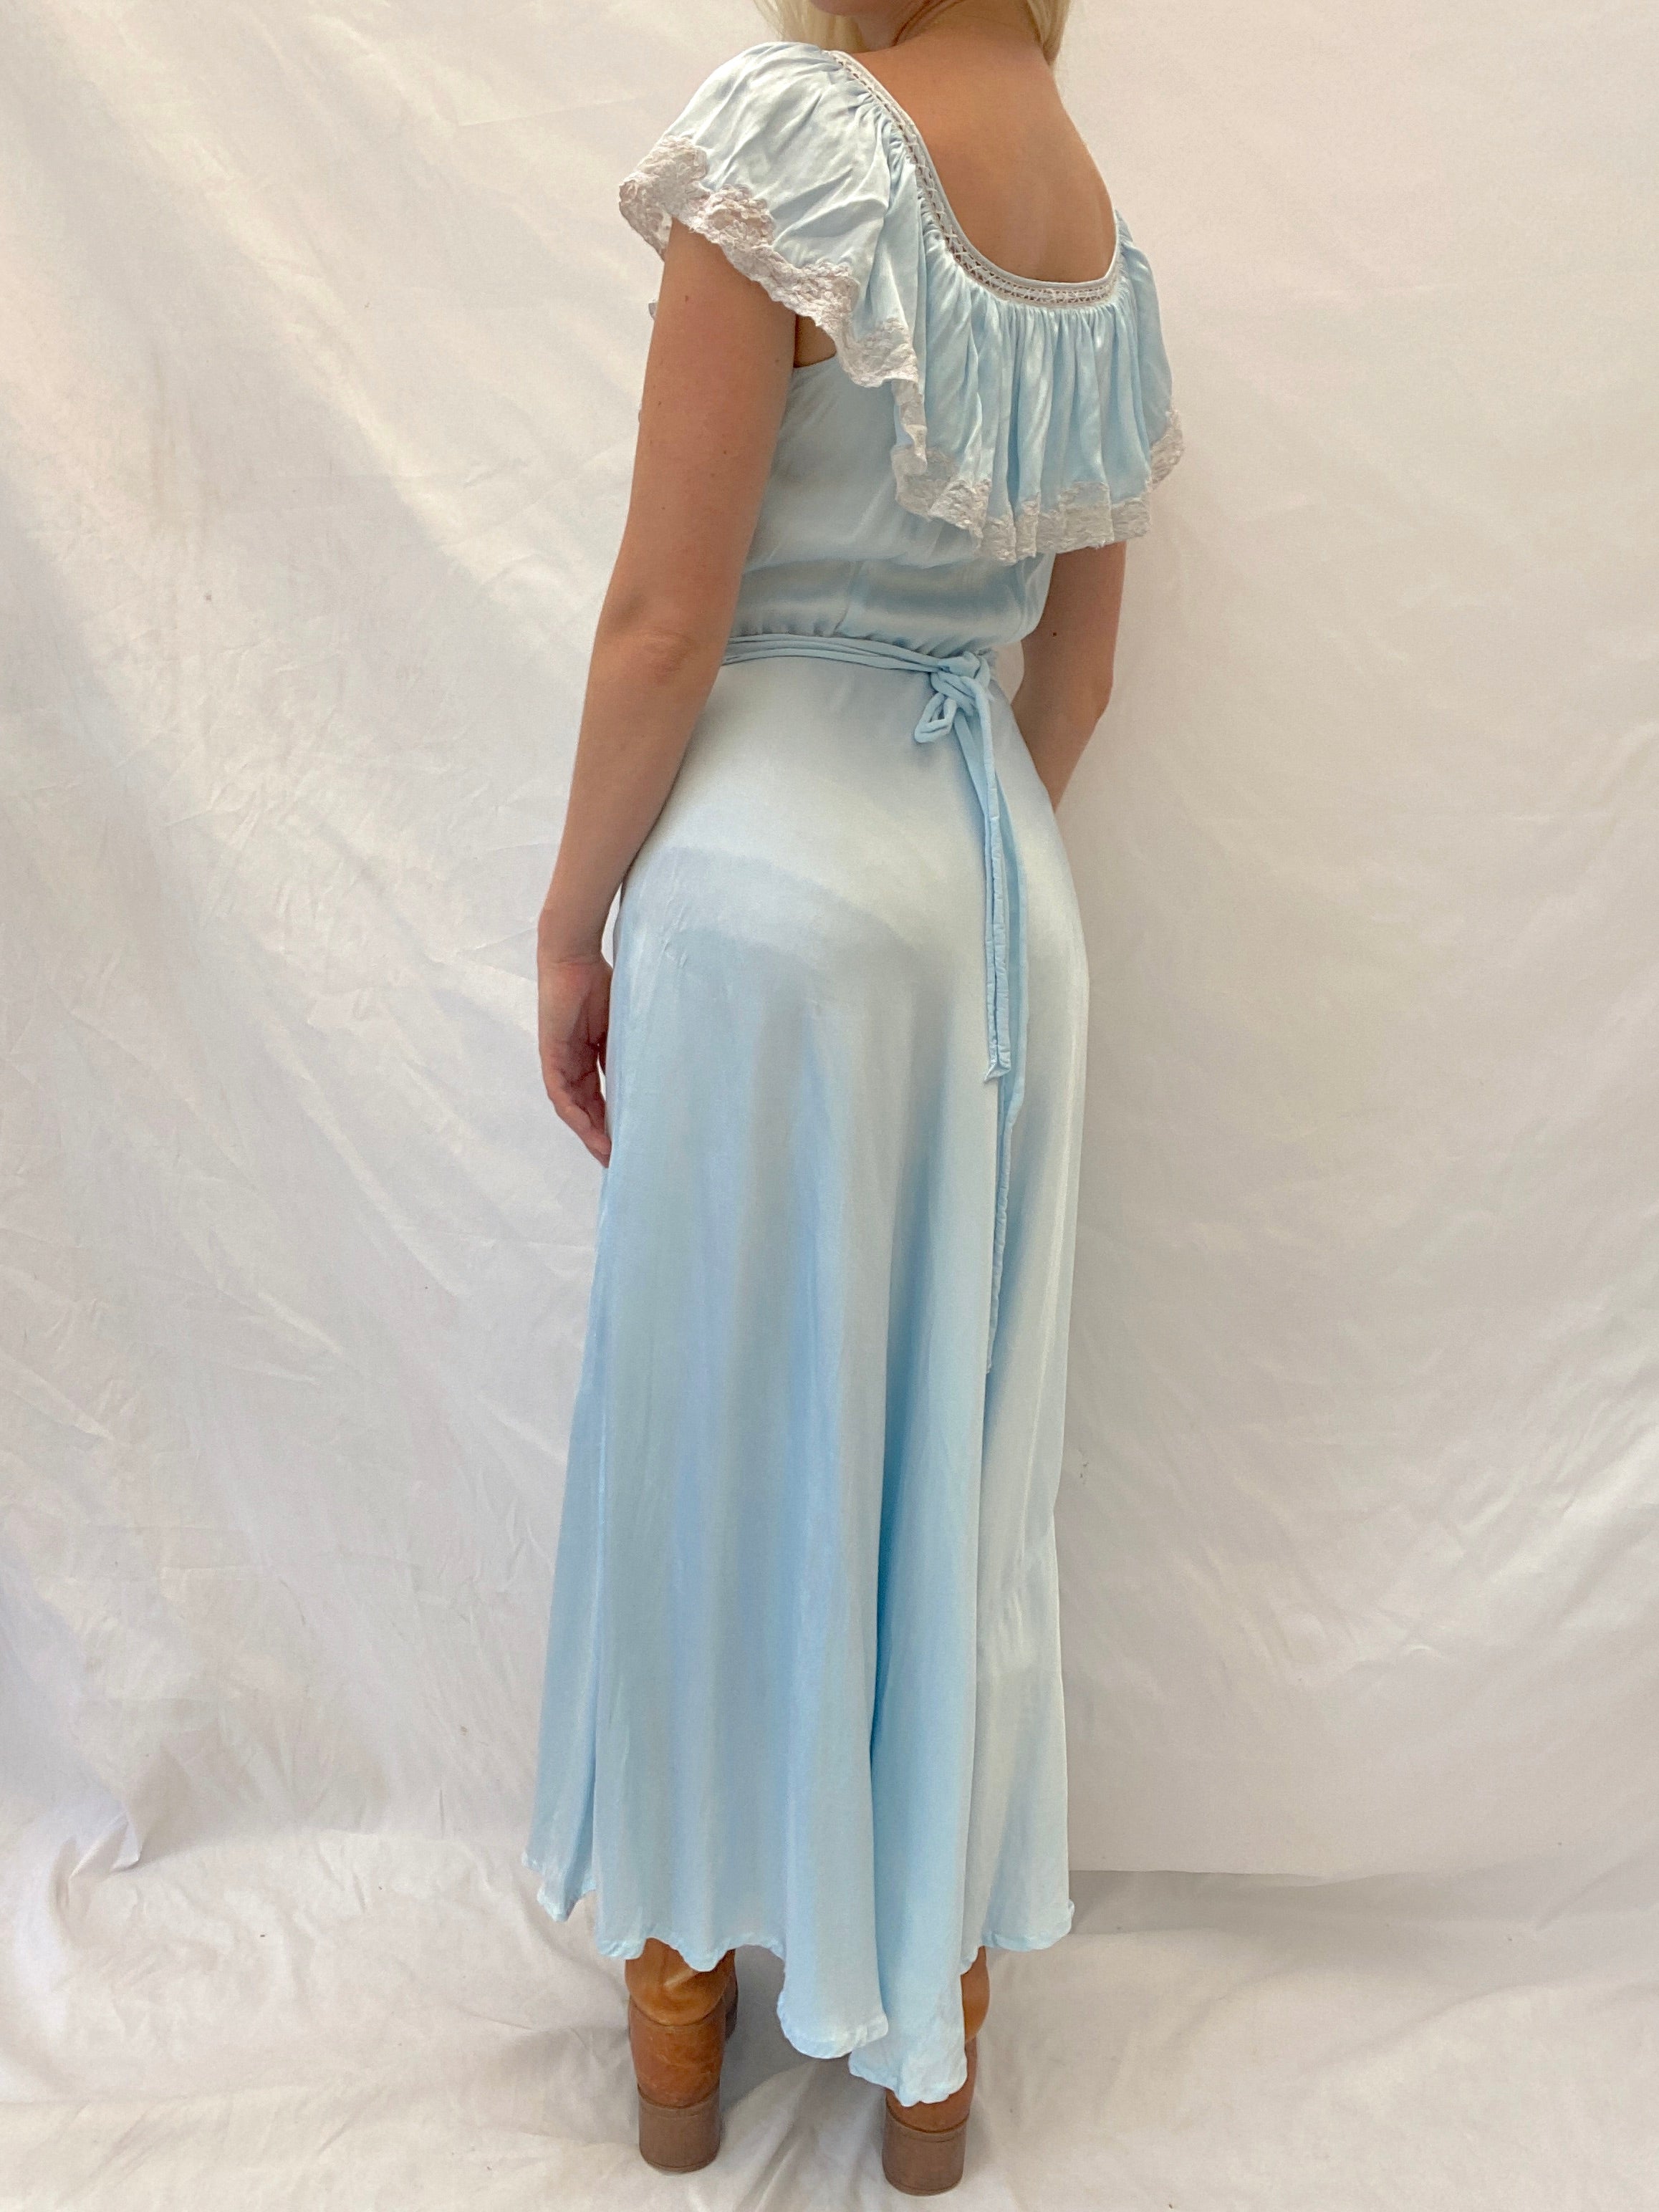 1940's Baby Blue Dress with Lace Trim Ruffle Collar